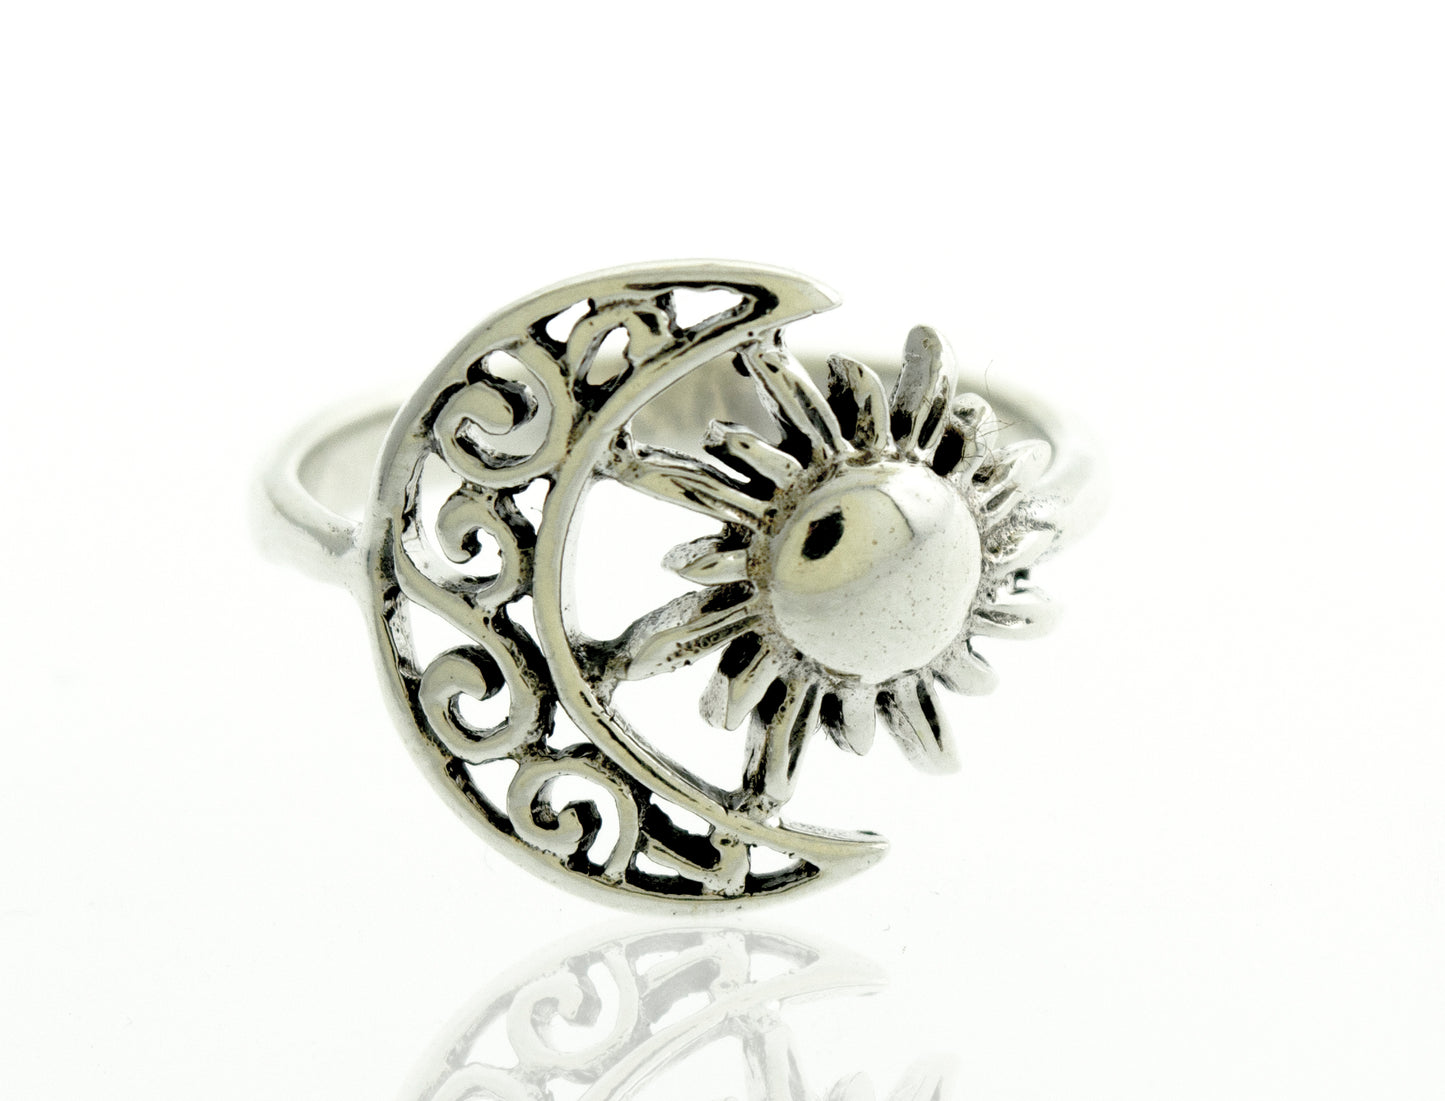 A Moon And Sun ring with a swirl design.